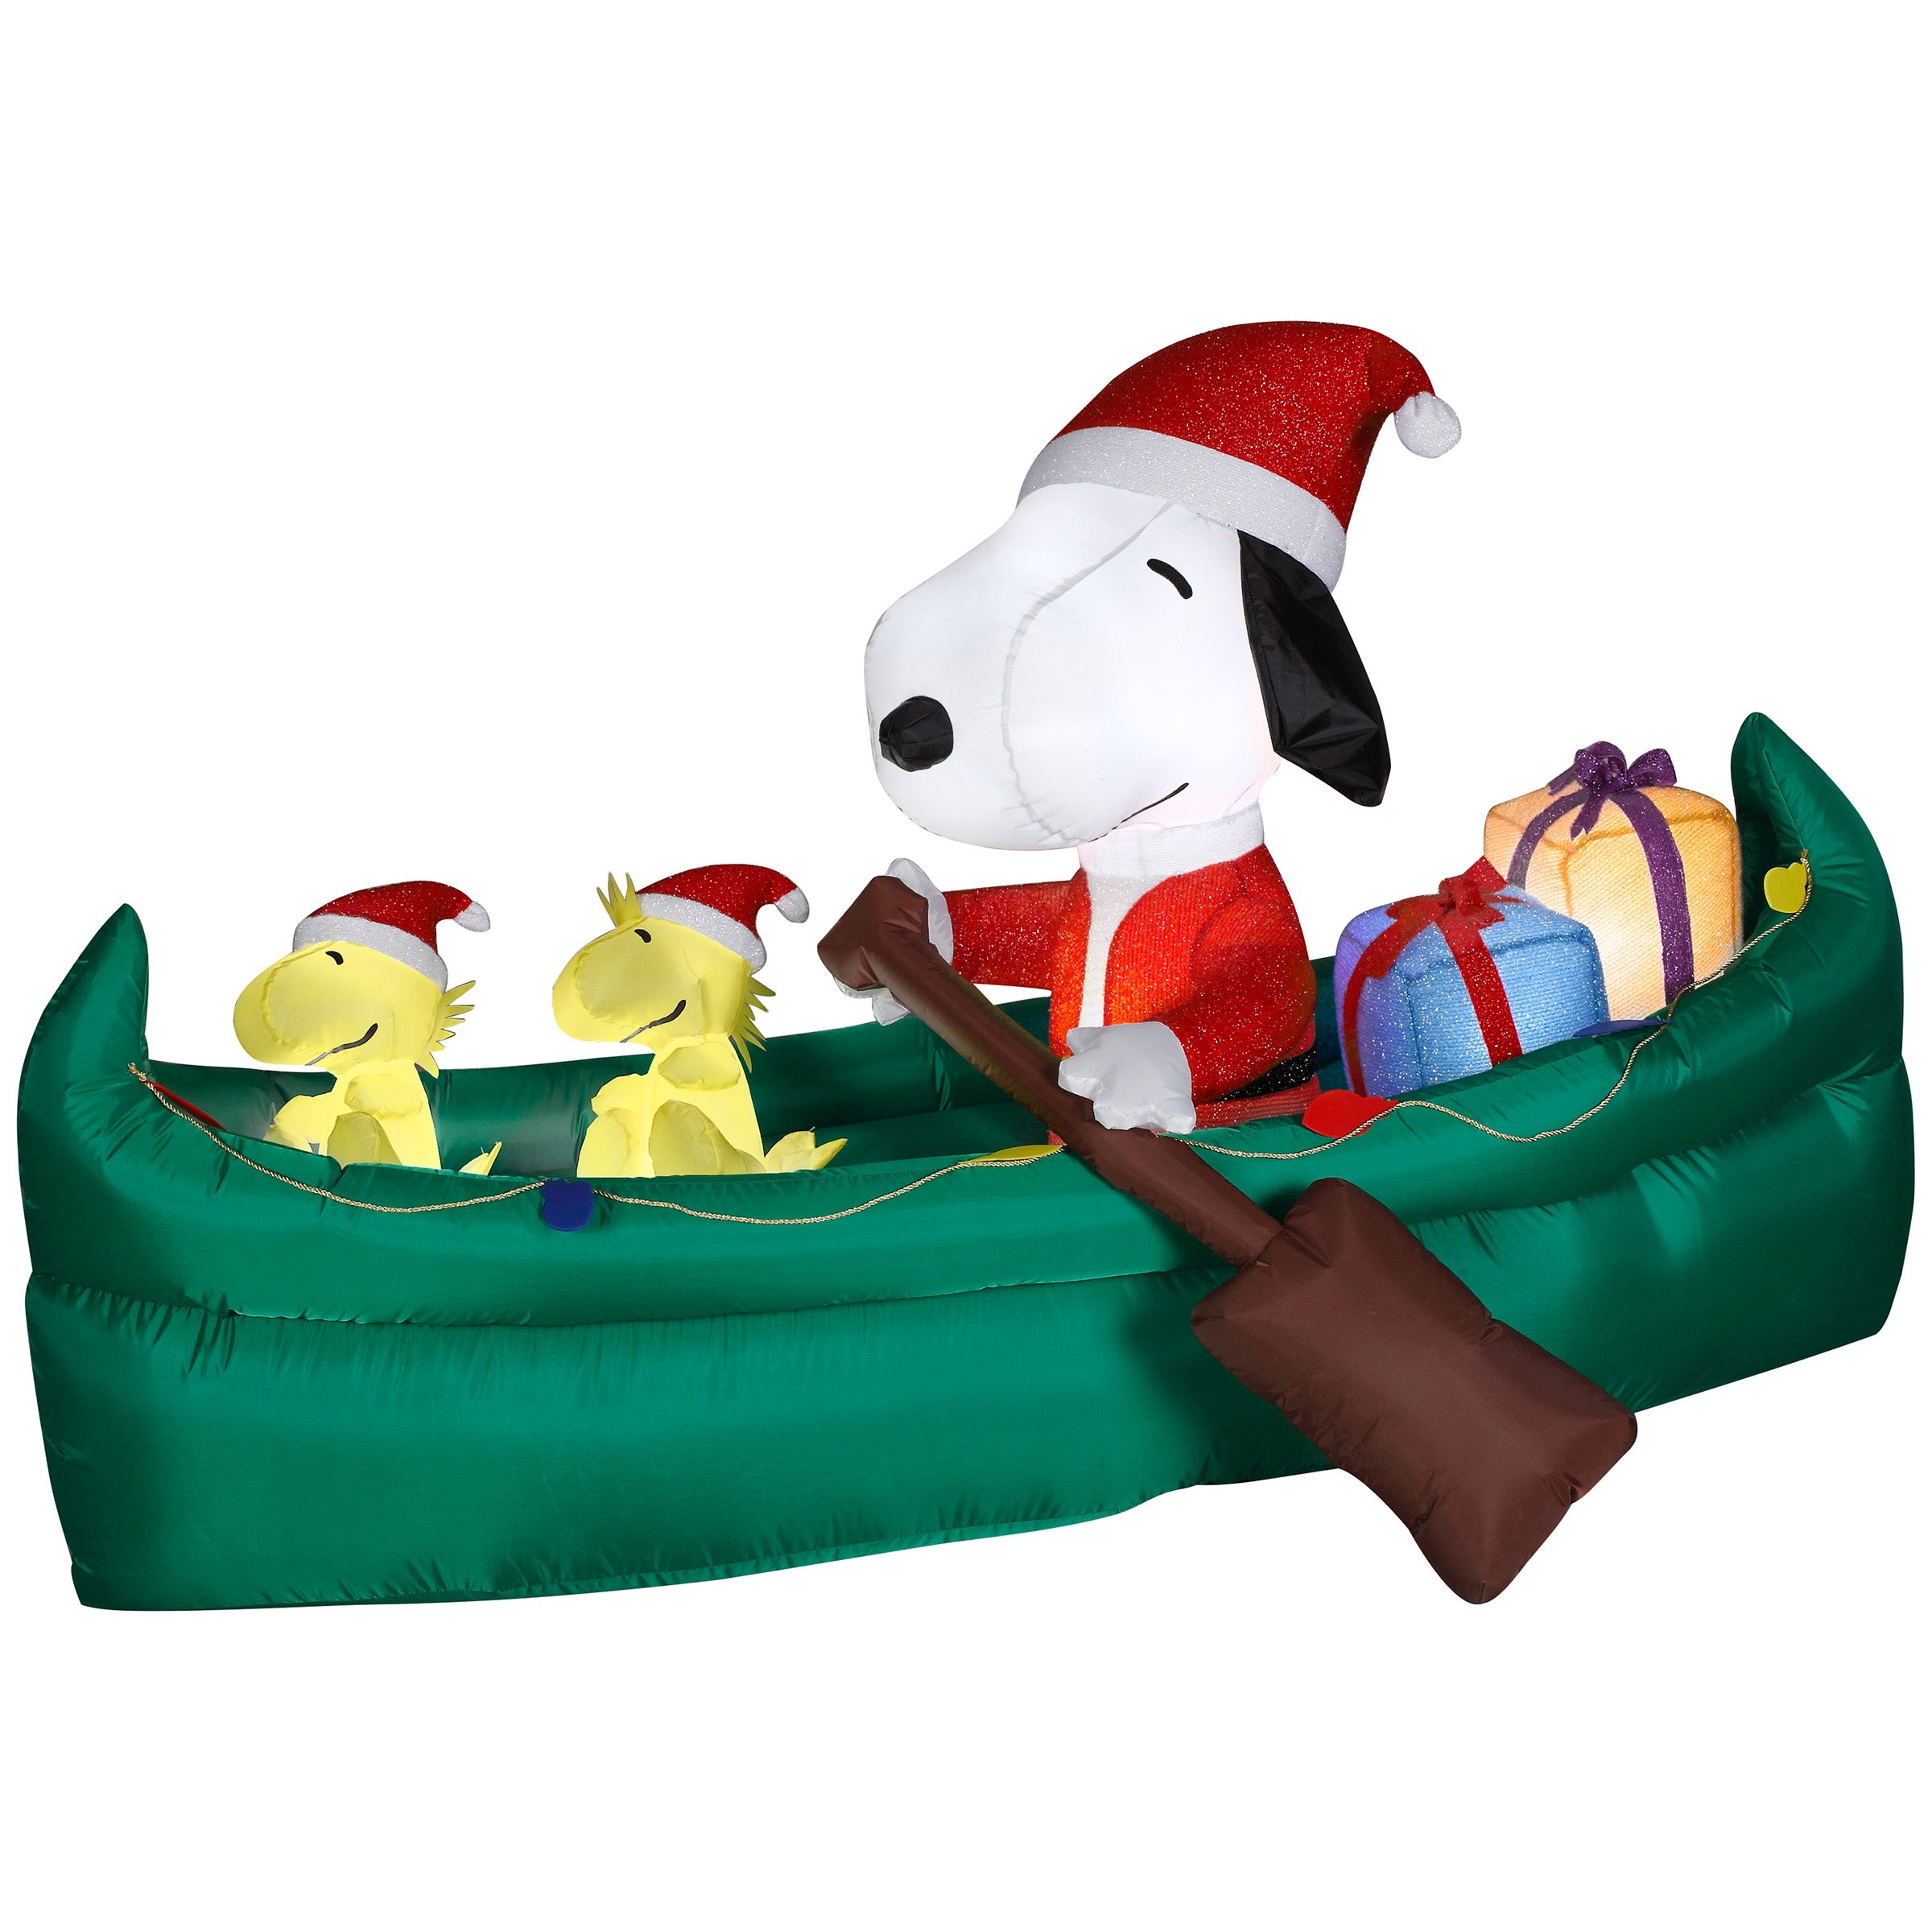 Gemmy Airblown Inflatable Snoopy In Canoe